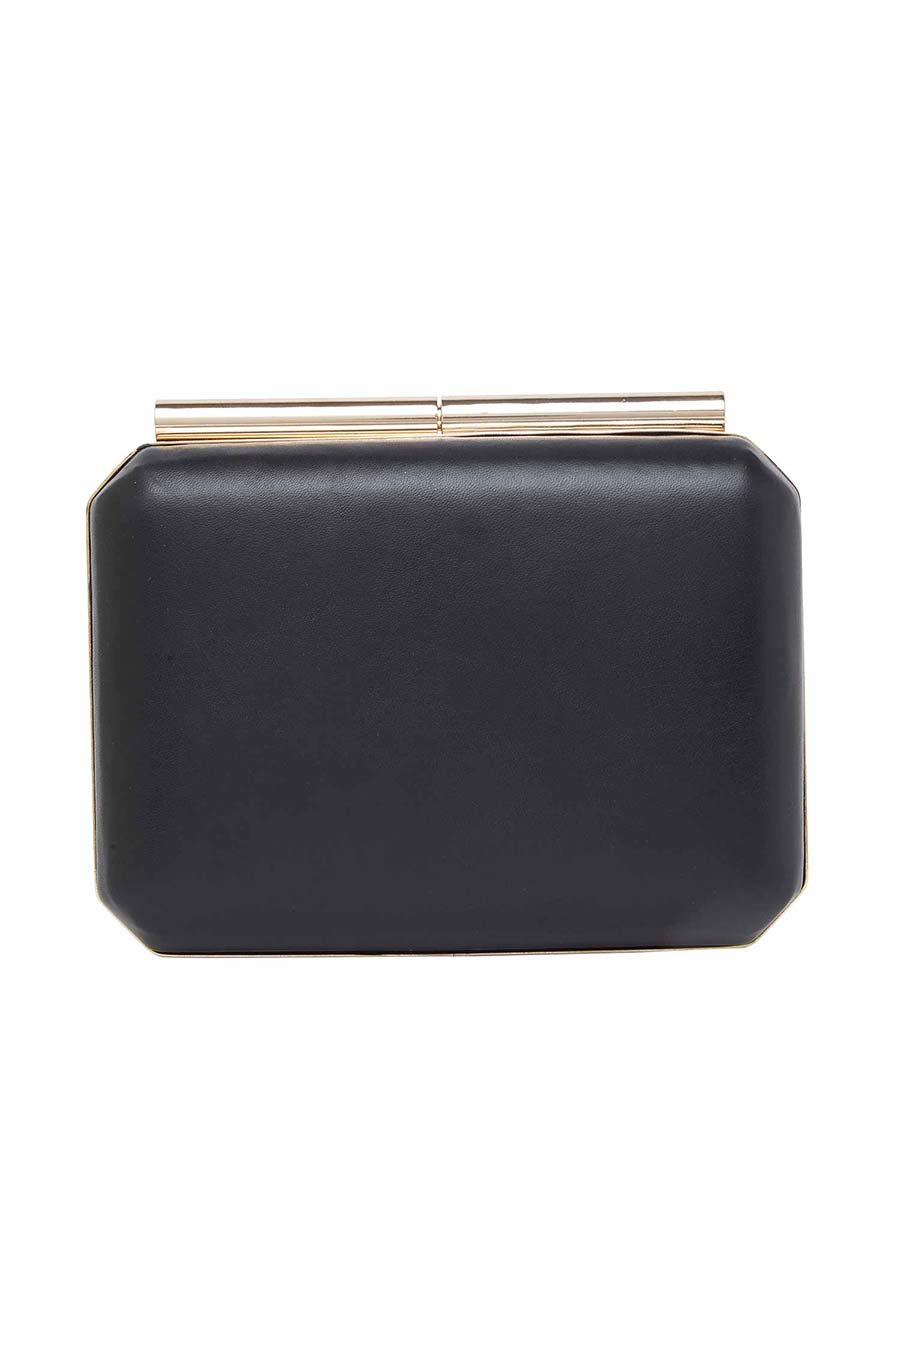 Black Leather Clutch With Gold Rose